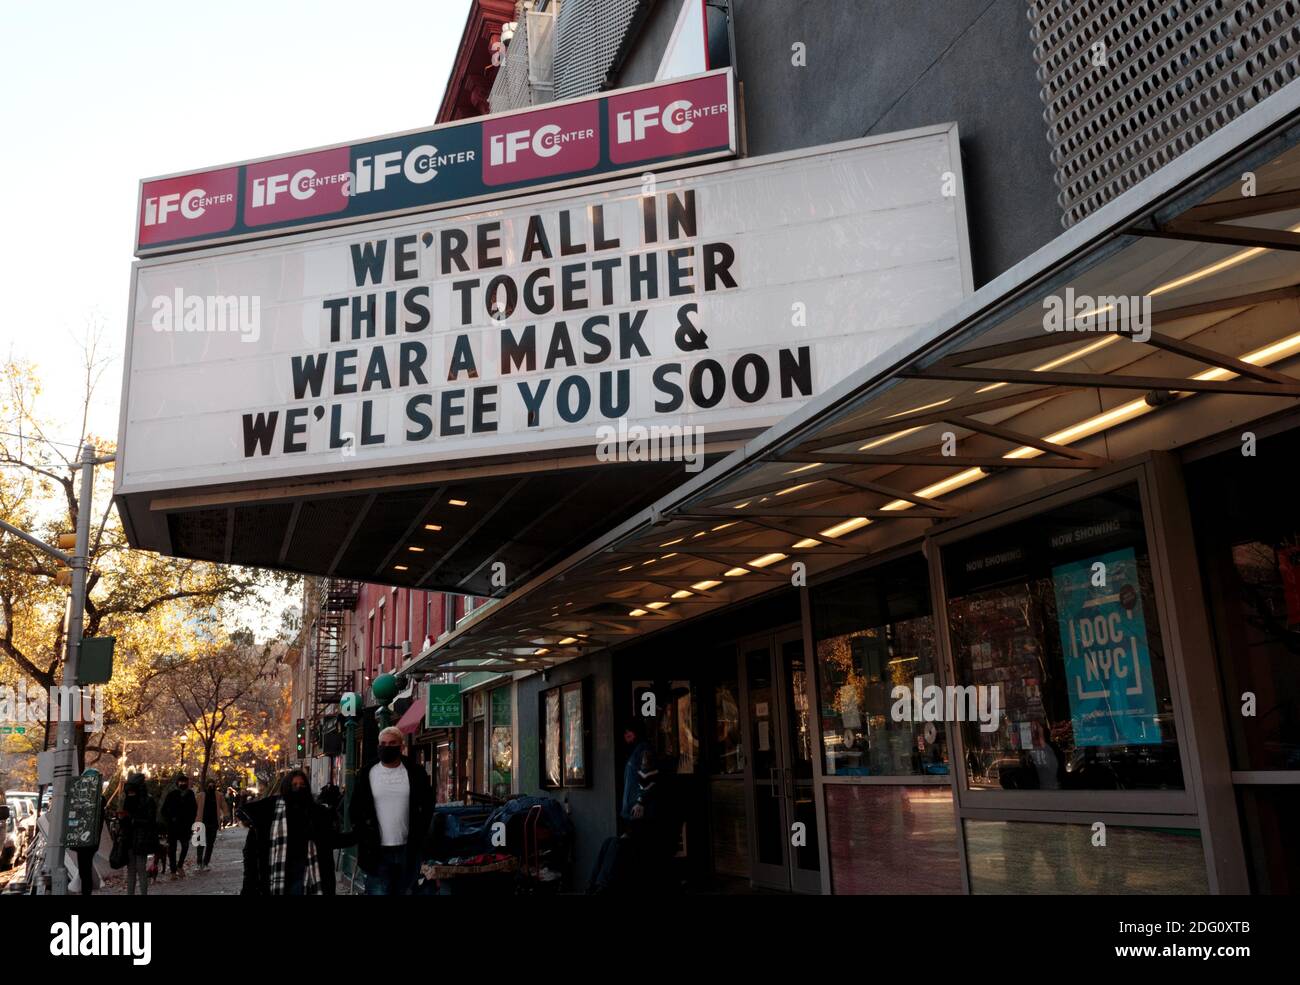 marquee sign at the IFC Center, an art house movie theatre in greenwich village, nyc, advising to wear a mask during coronavirus or covid-19 pandemic Stock Photo